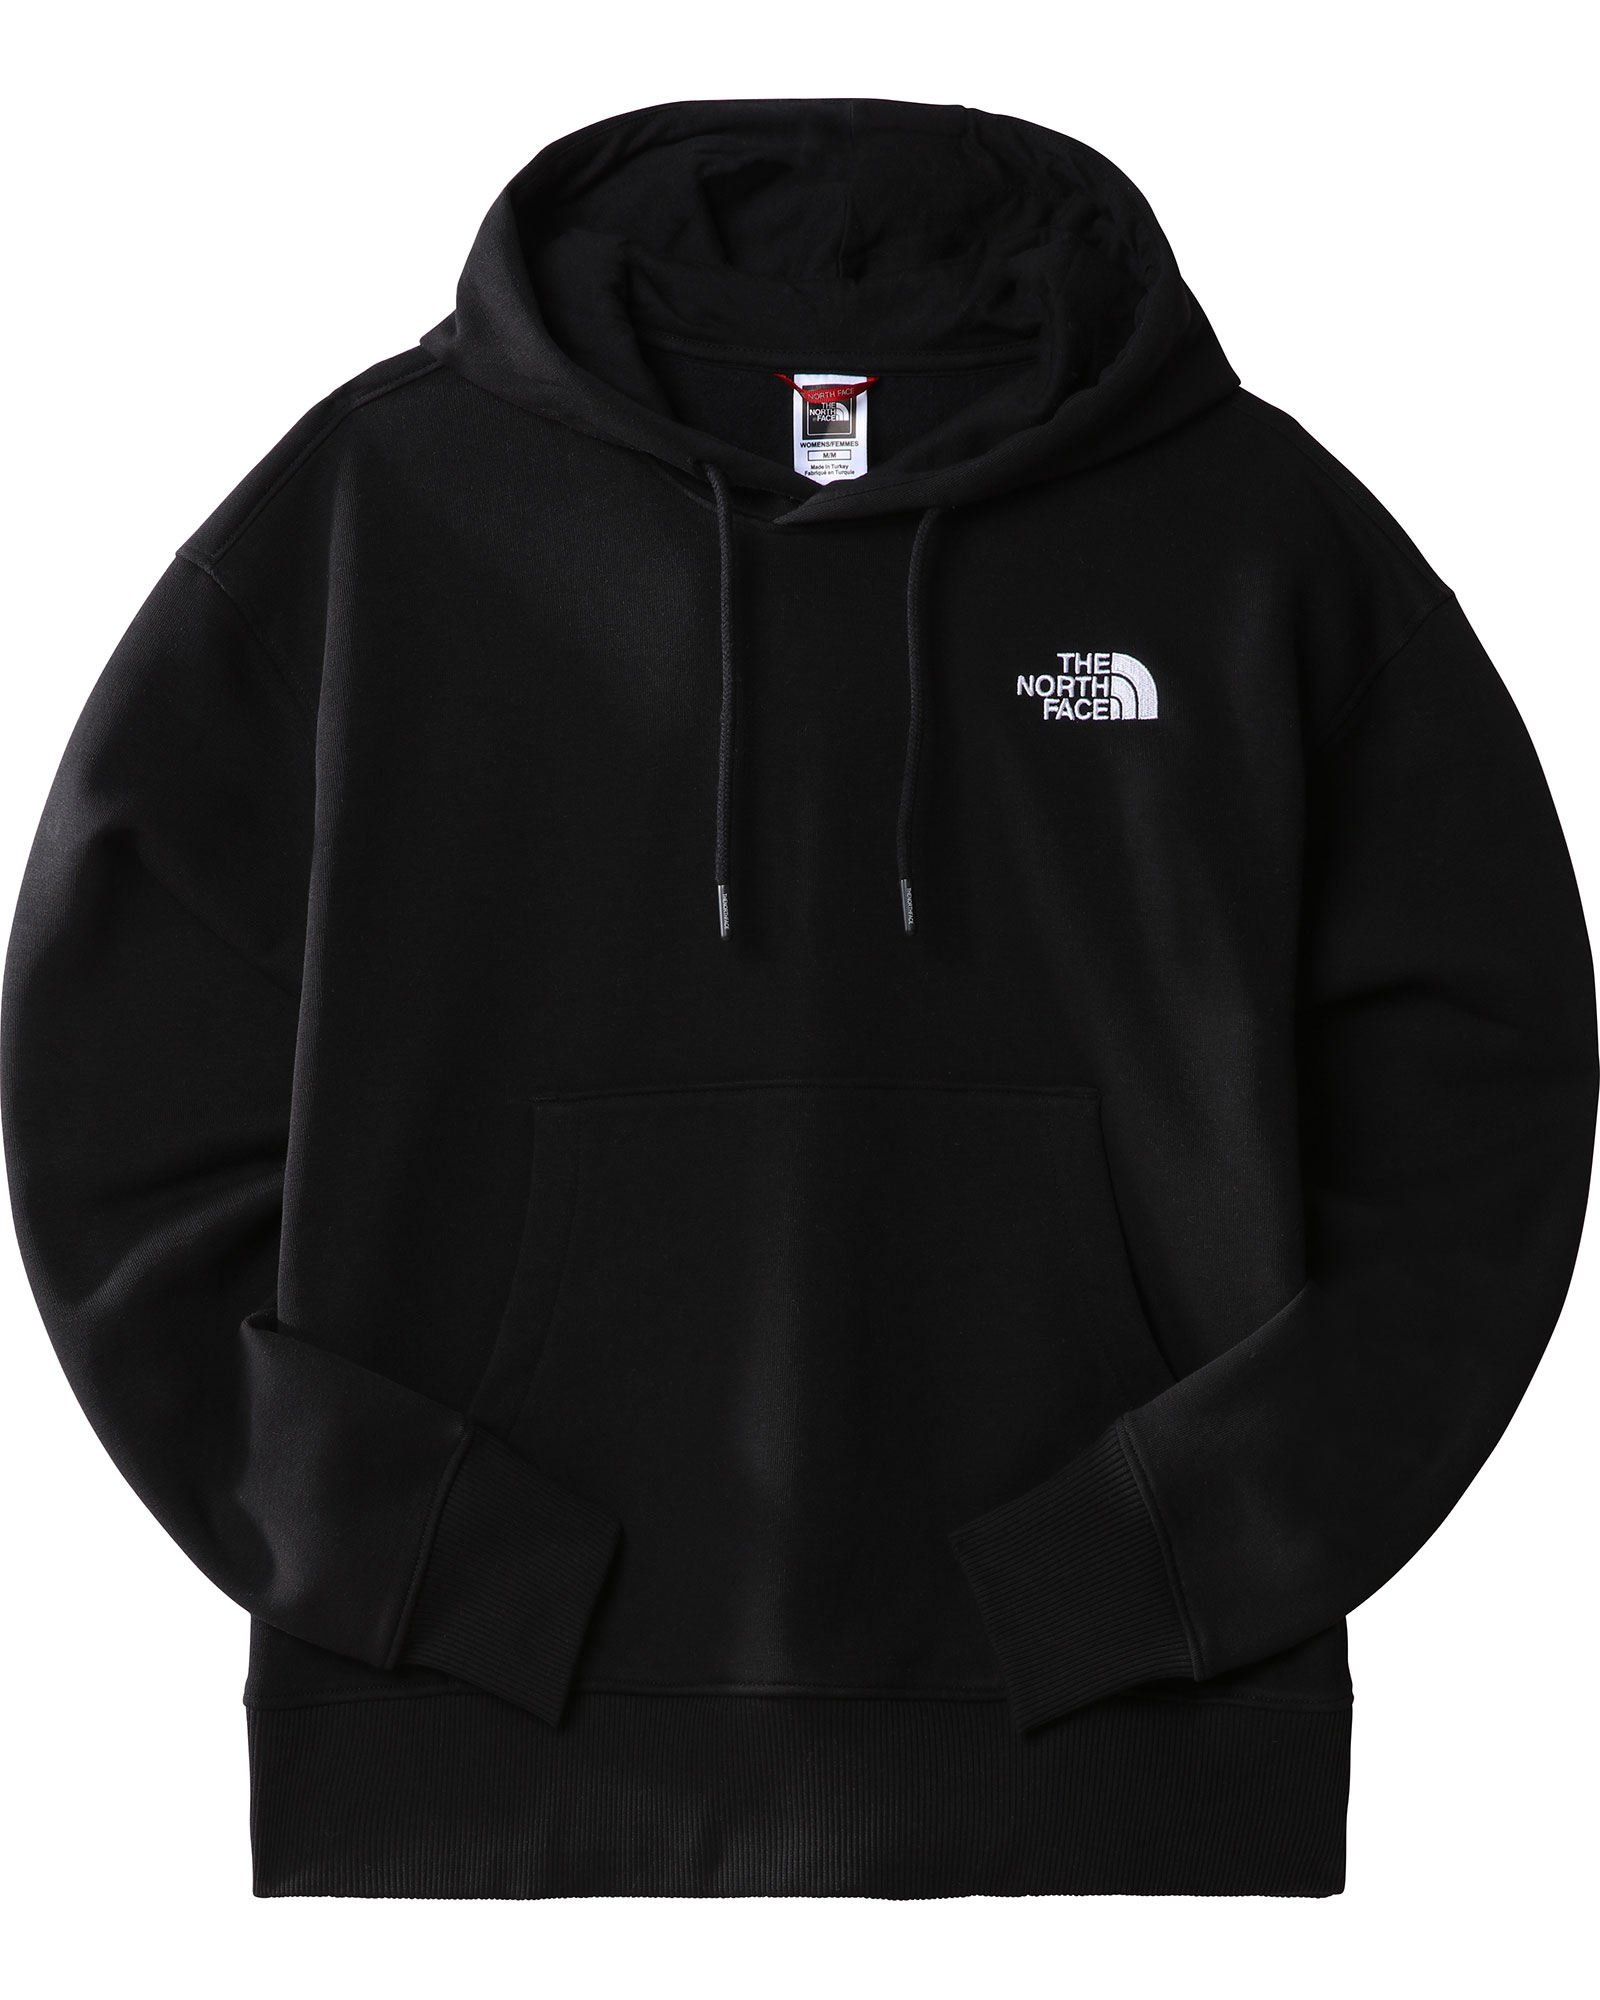 The North Face Women’s Essential Hoodie - TNF Black XS